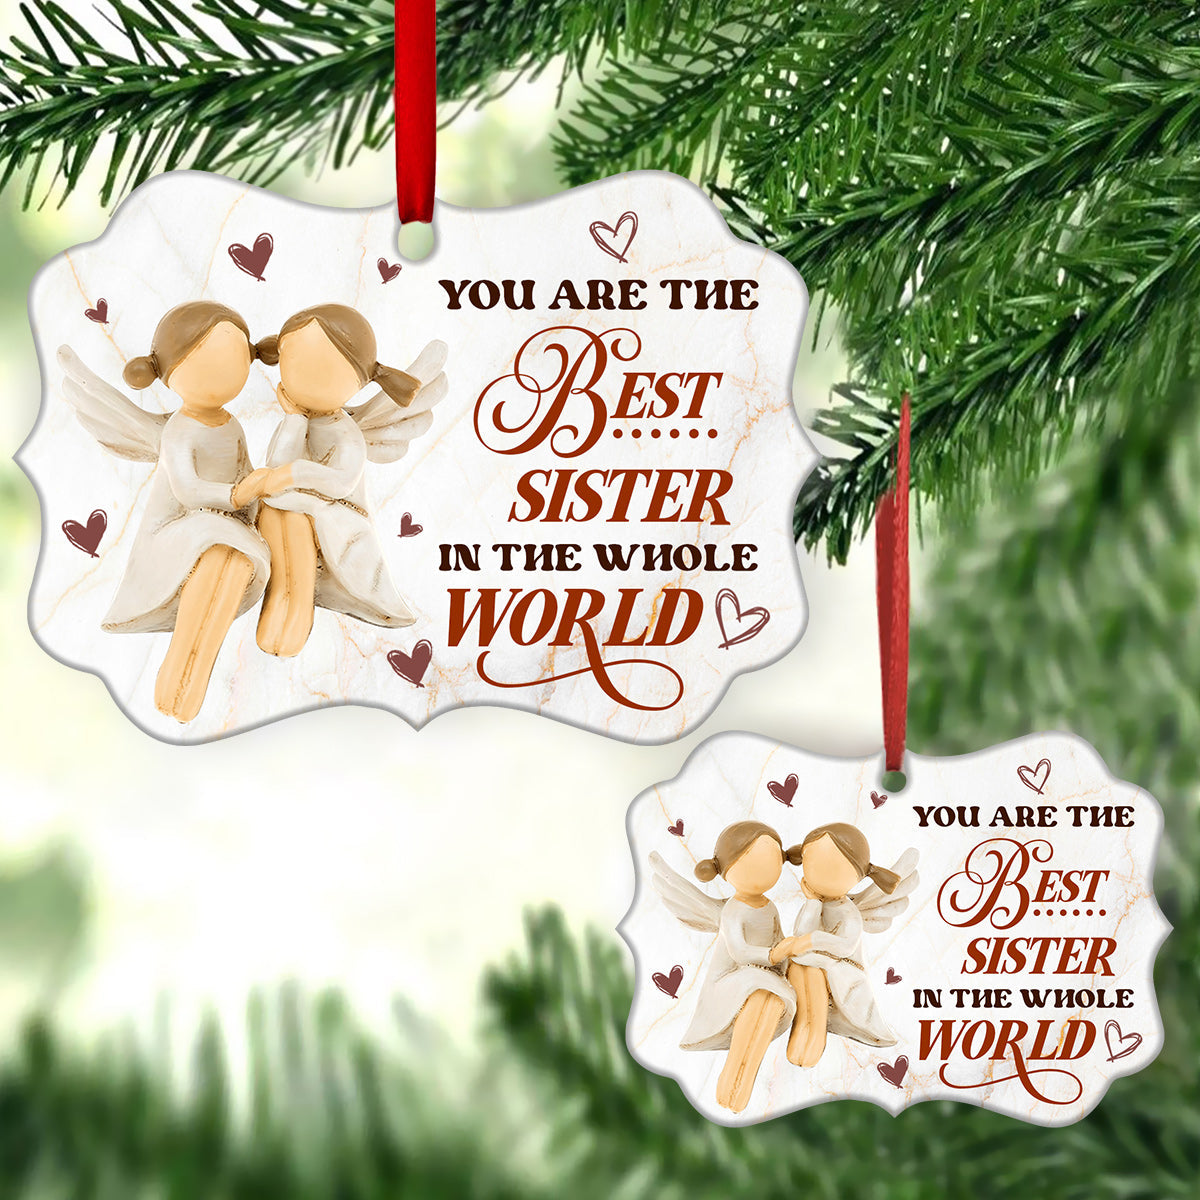 Sister Angel You Are The Best Sister In The Whole World Metal Ornament - Christmas Ornament - Christmas Gift